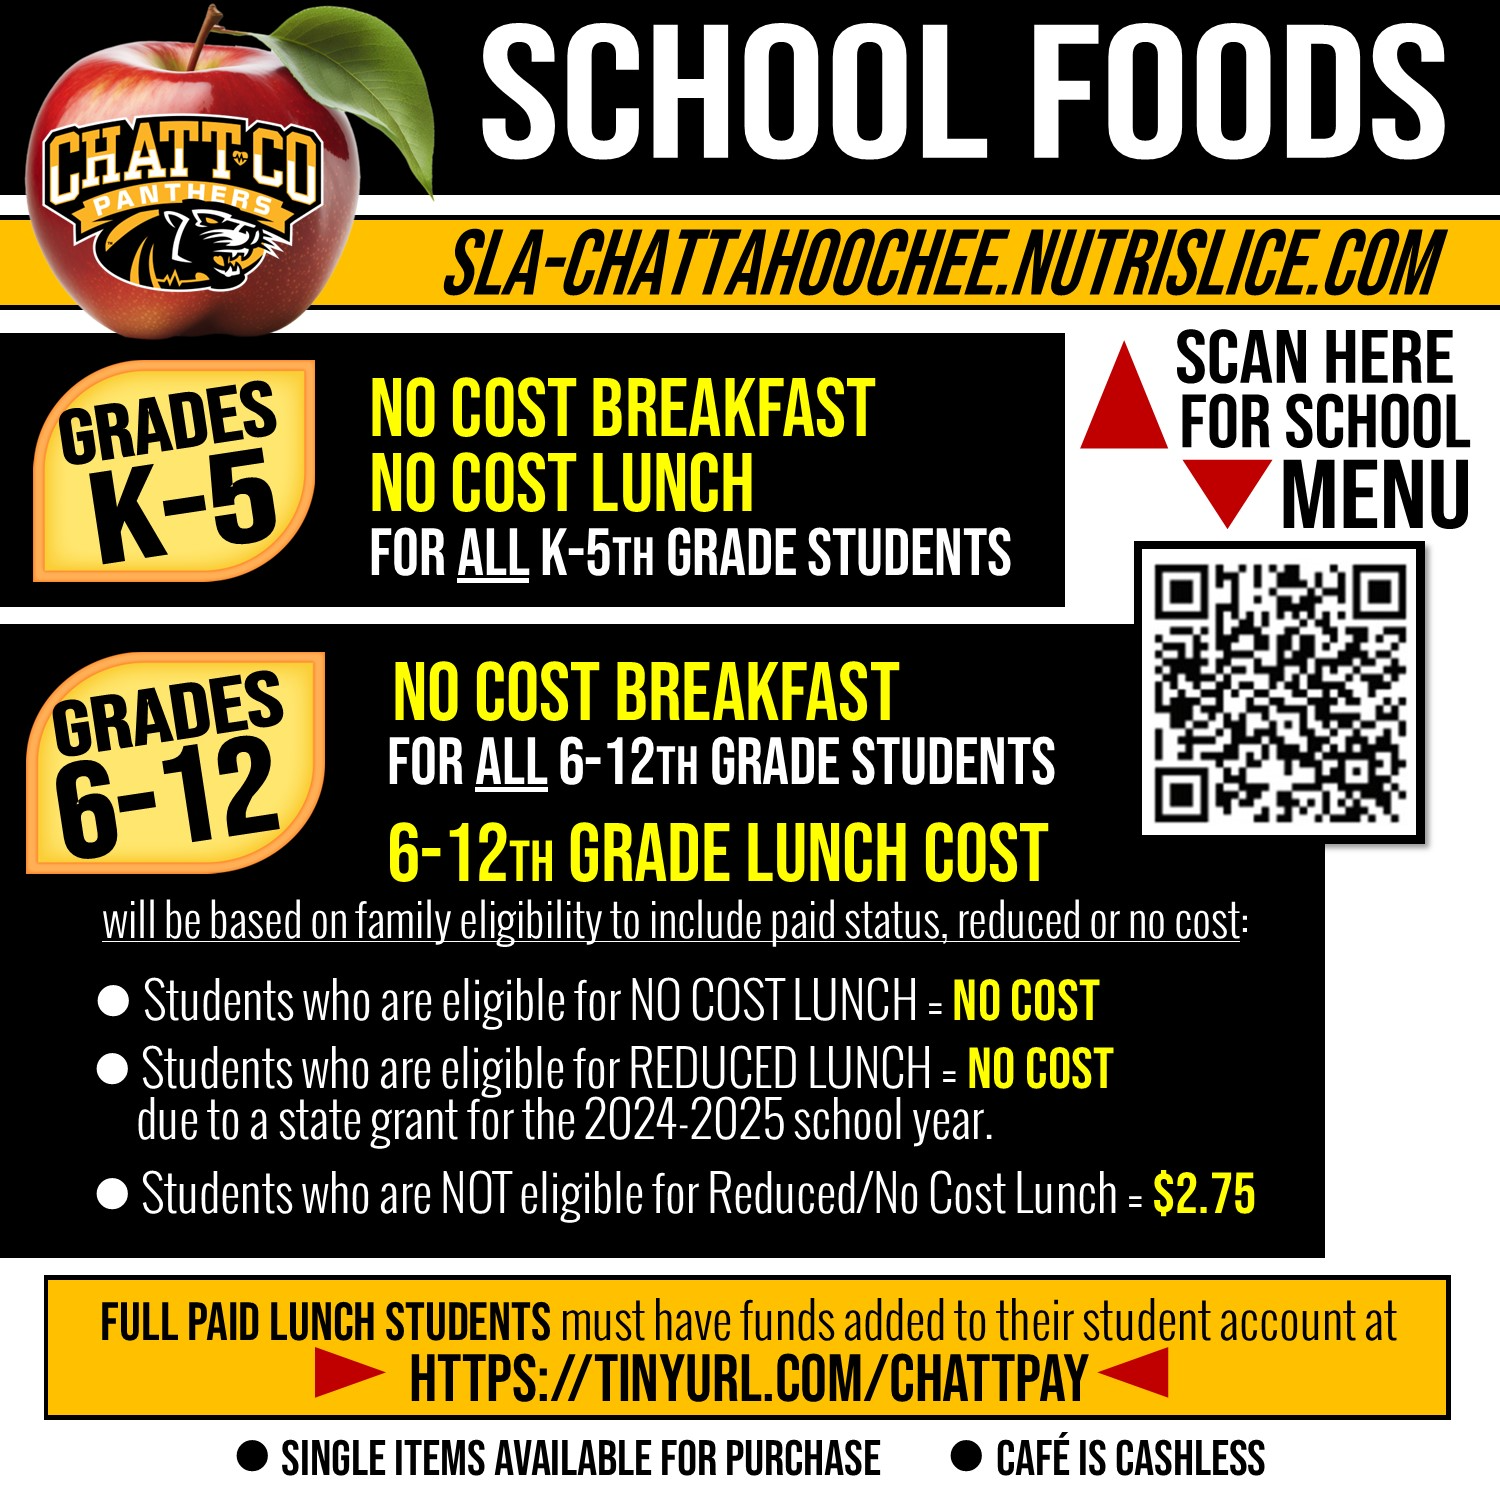 School Foods Scan here for school menu: sla-Chattahoochee.nutrislice.com Grades K-5: No cost breakfast and lunch Grades 6-12: No cost breakfast. 6-12th grade lunch cost will be based on family eligibility to include paid status, reduced or no cost. Students who are eligible for NO COST lunch = no cost, students who are eligible for reduced lunch = no cost due to a state grant for the 24-25 school year, students who are not eligible for reduced/no cost lunch = $2.75  Full paid lunch students must have funds added to their student account at https://tinyurl.com/chattpay  Single items available for purchase. Café is chashless.